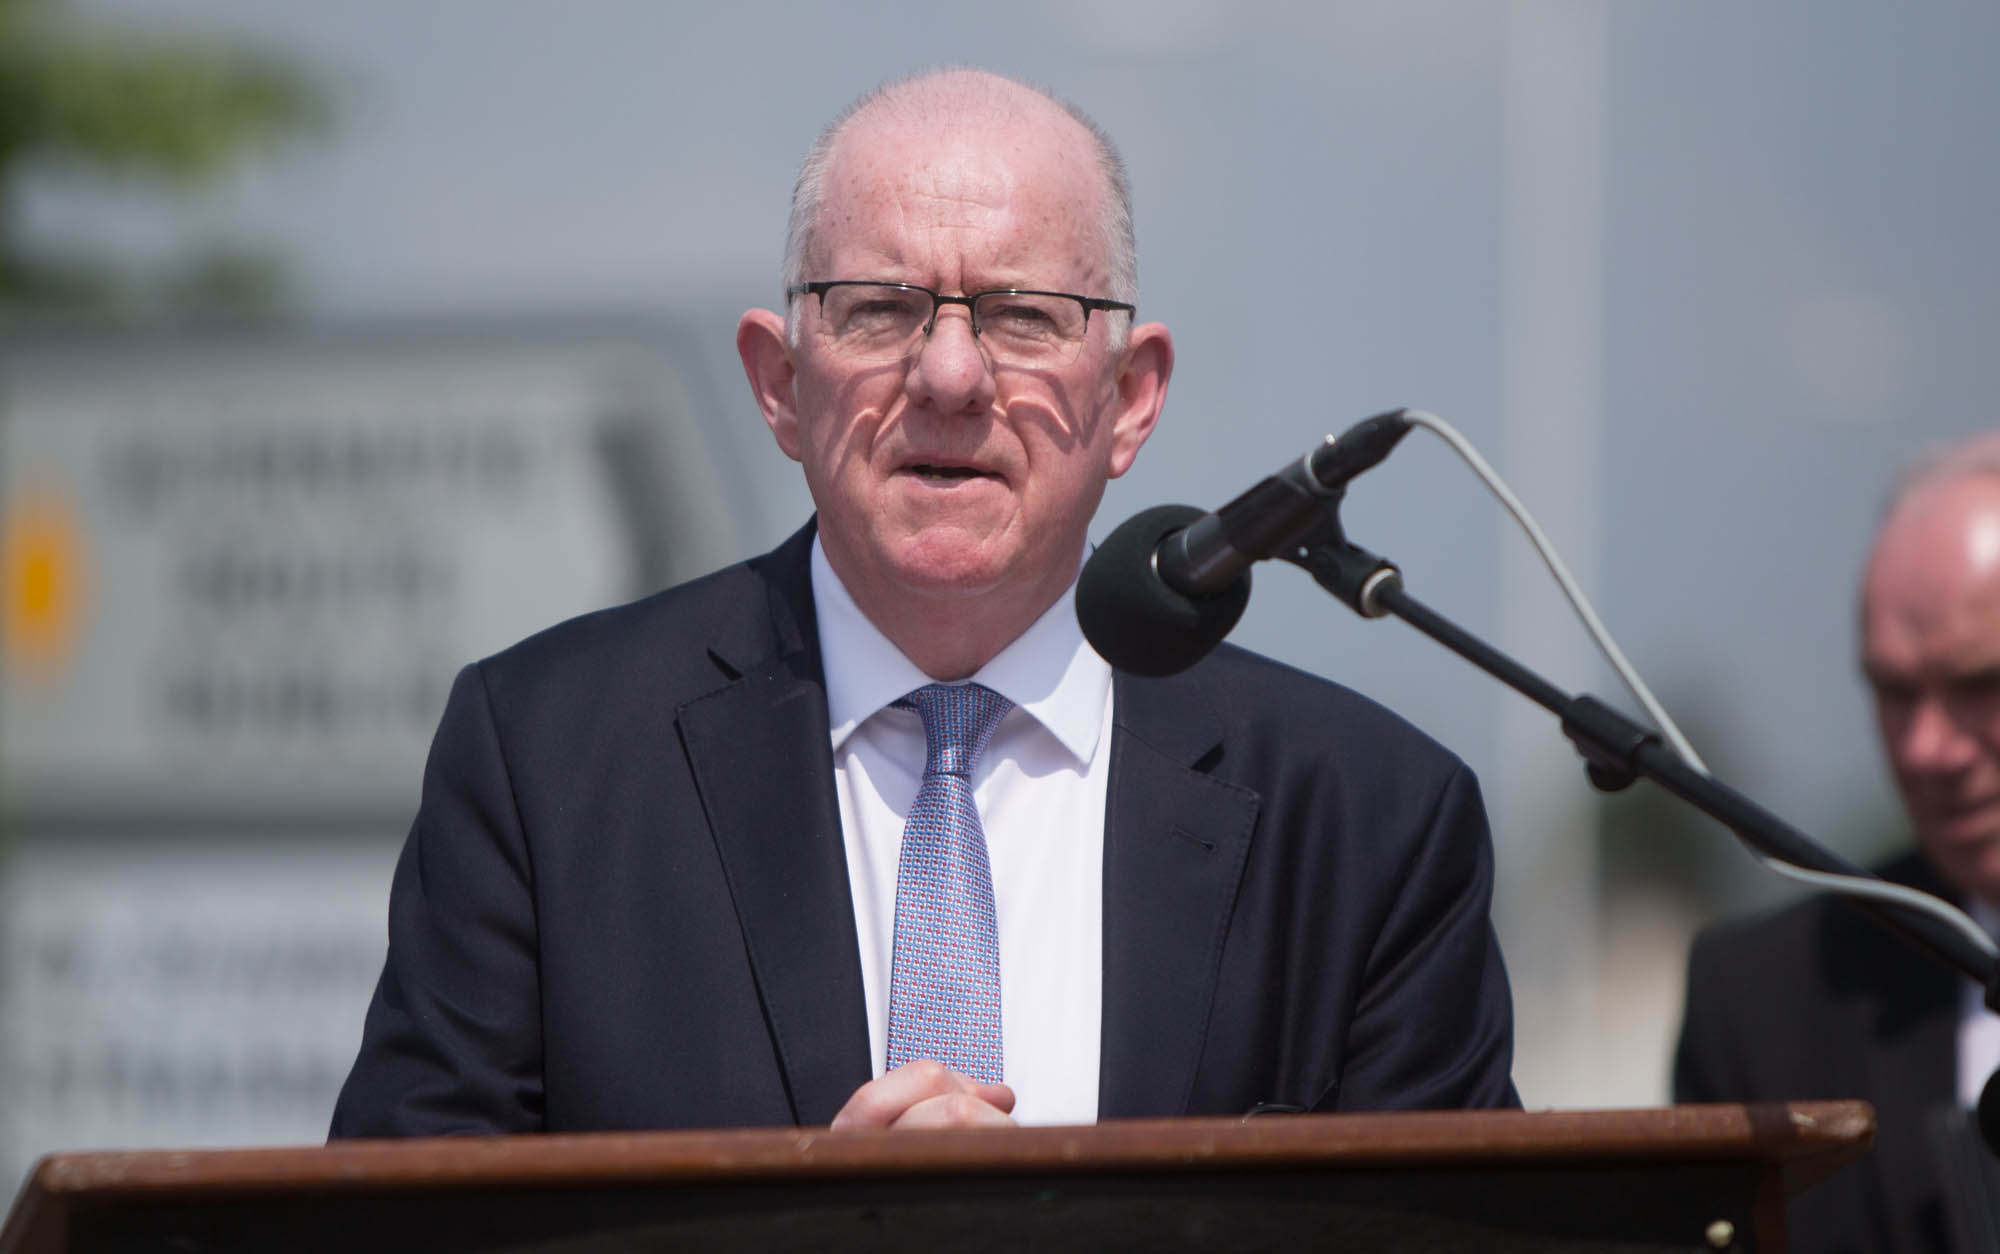 Charlie Flanagan retires: What happens next and what does it mean for the political landscape in Laois?